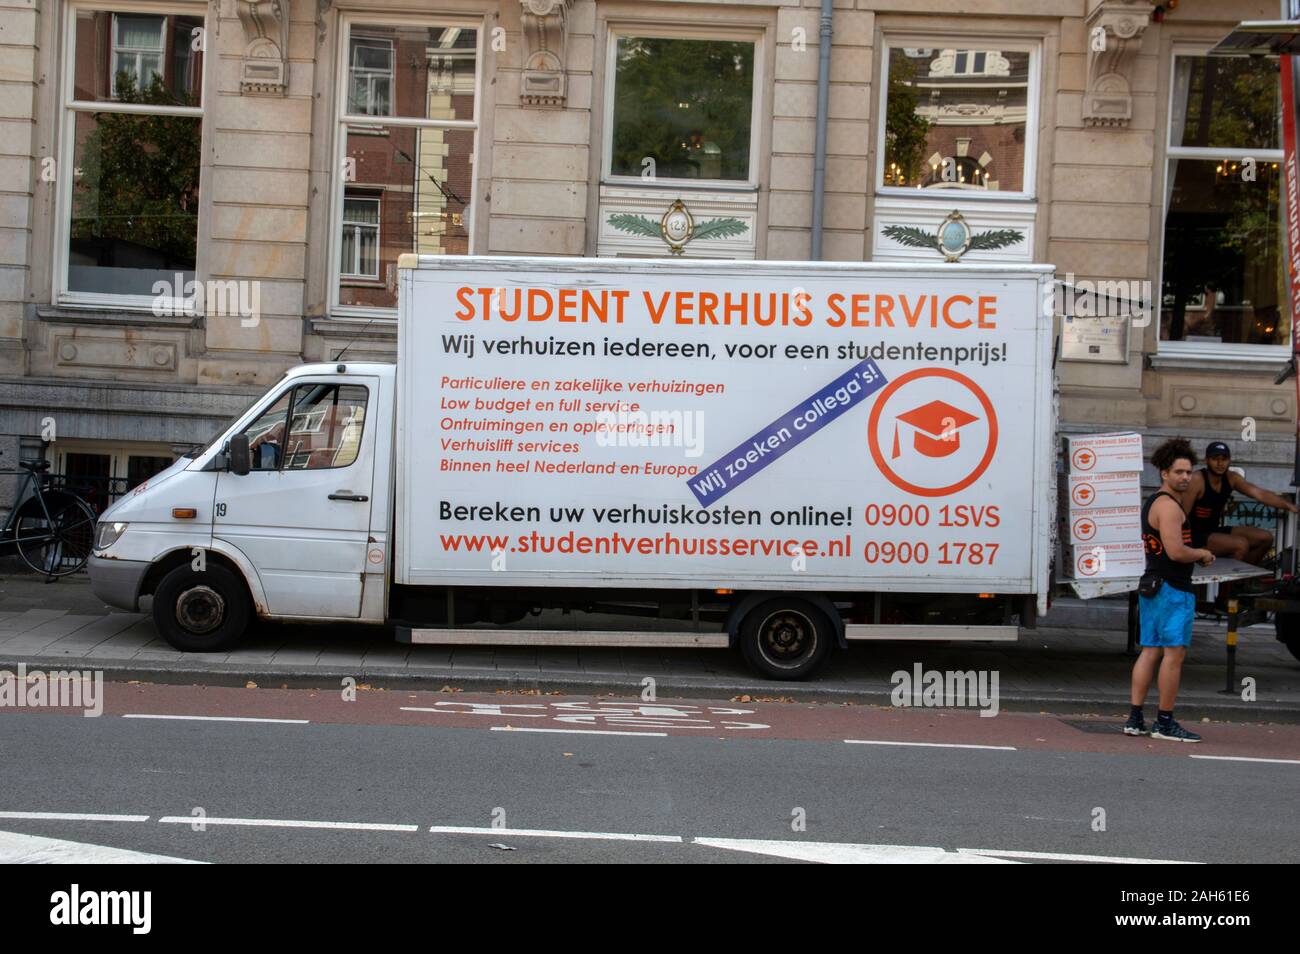 Student Verhuis Service Truck At Amsterdam The Netherlands 2019 Stock Photo  - Alamy